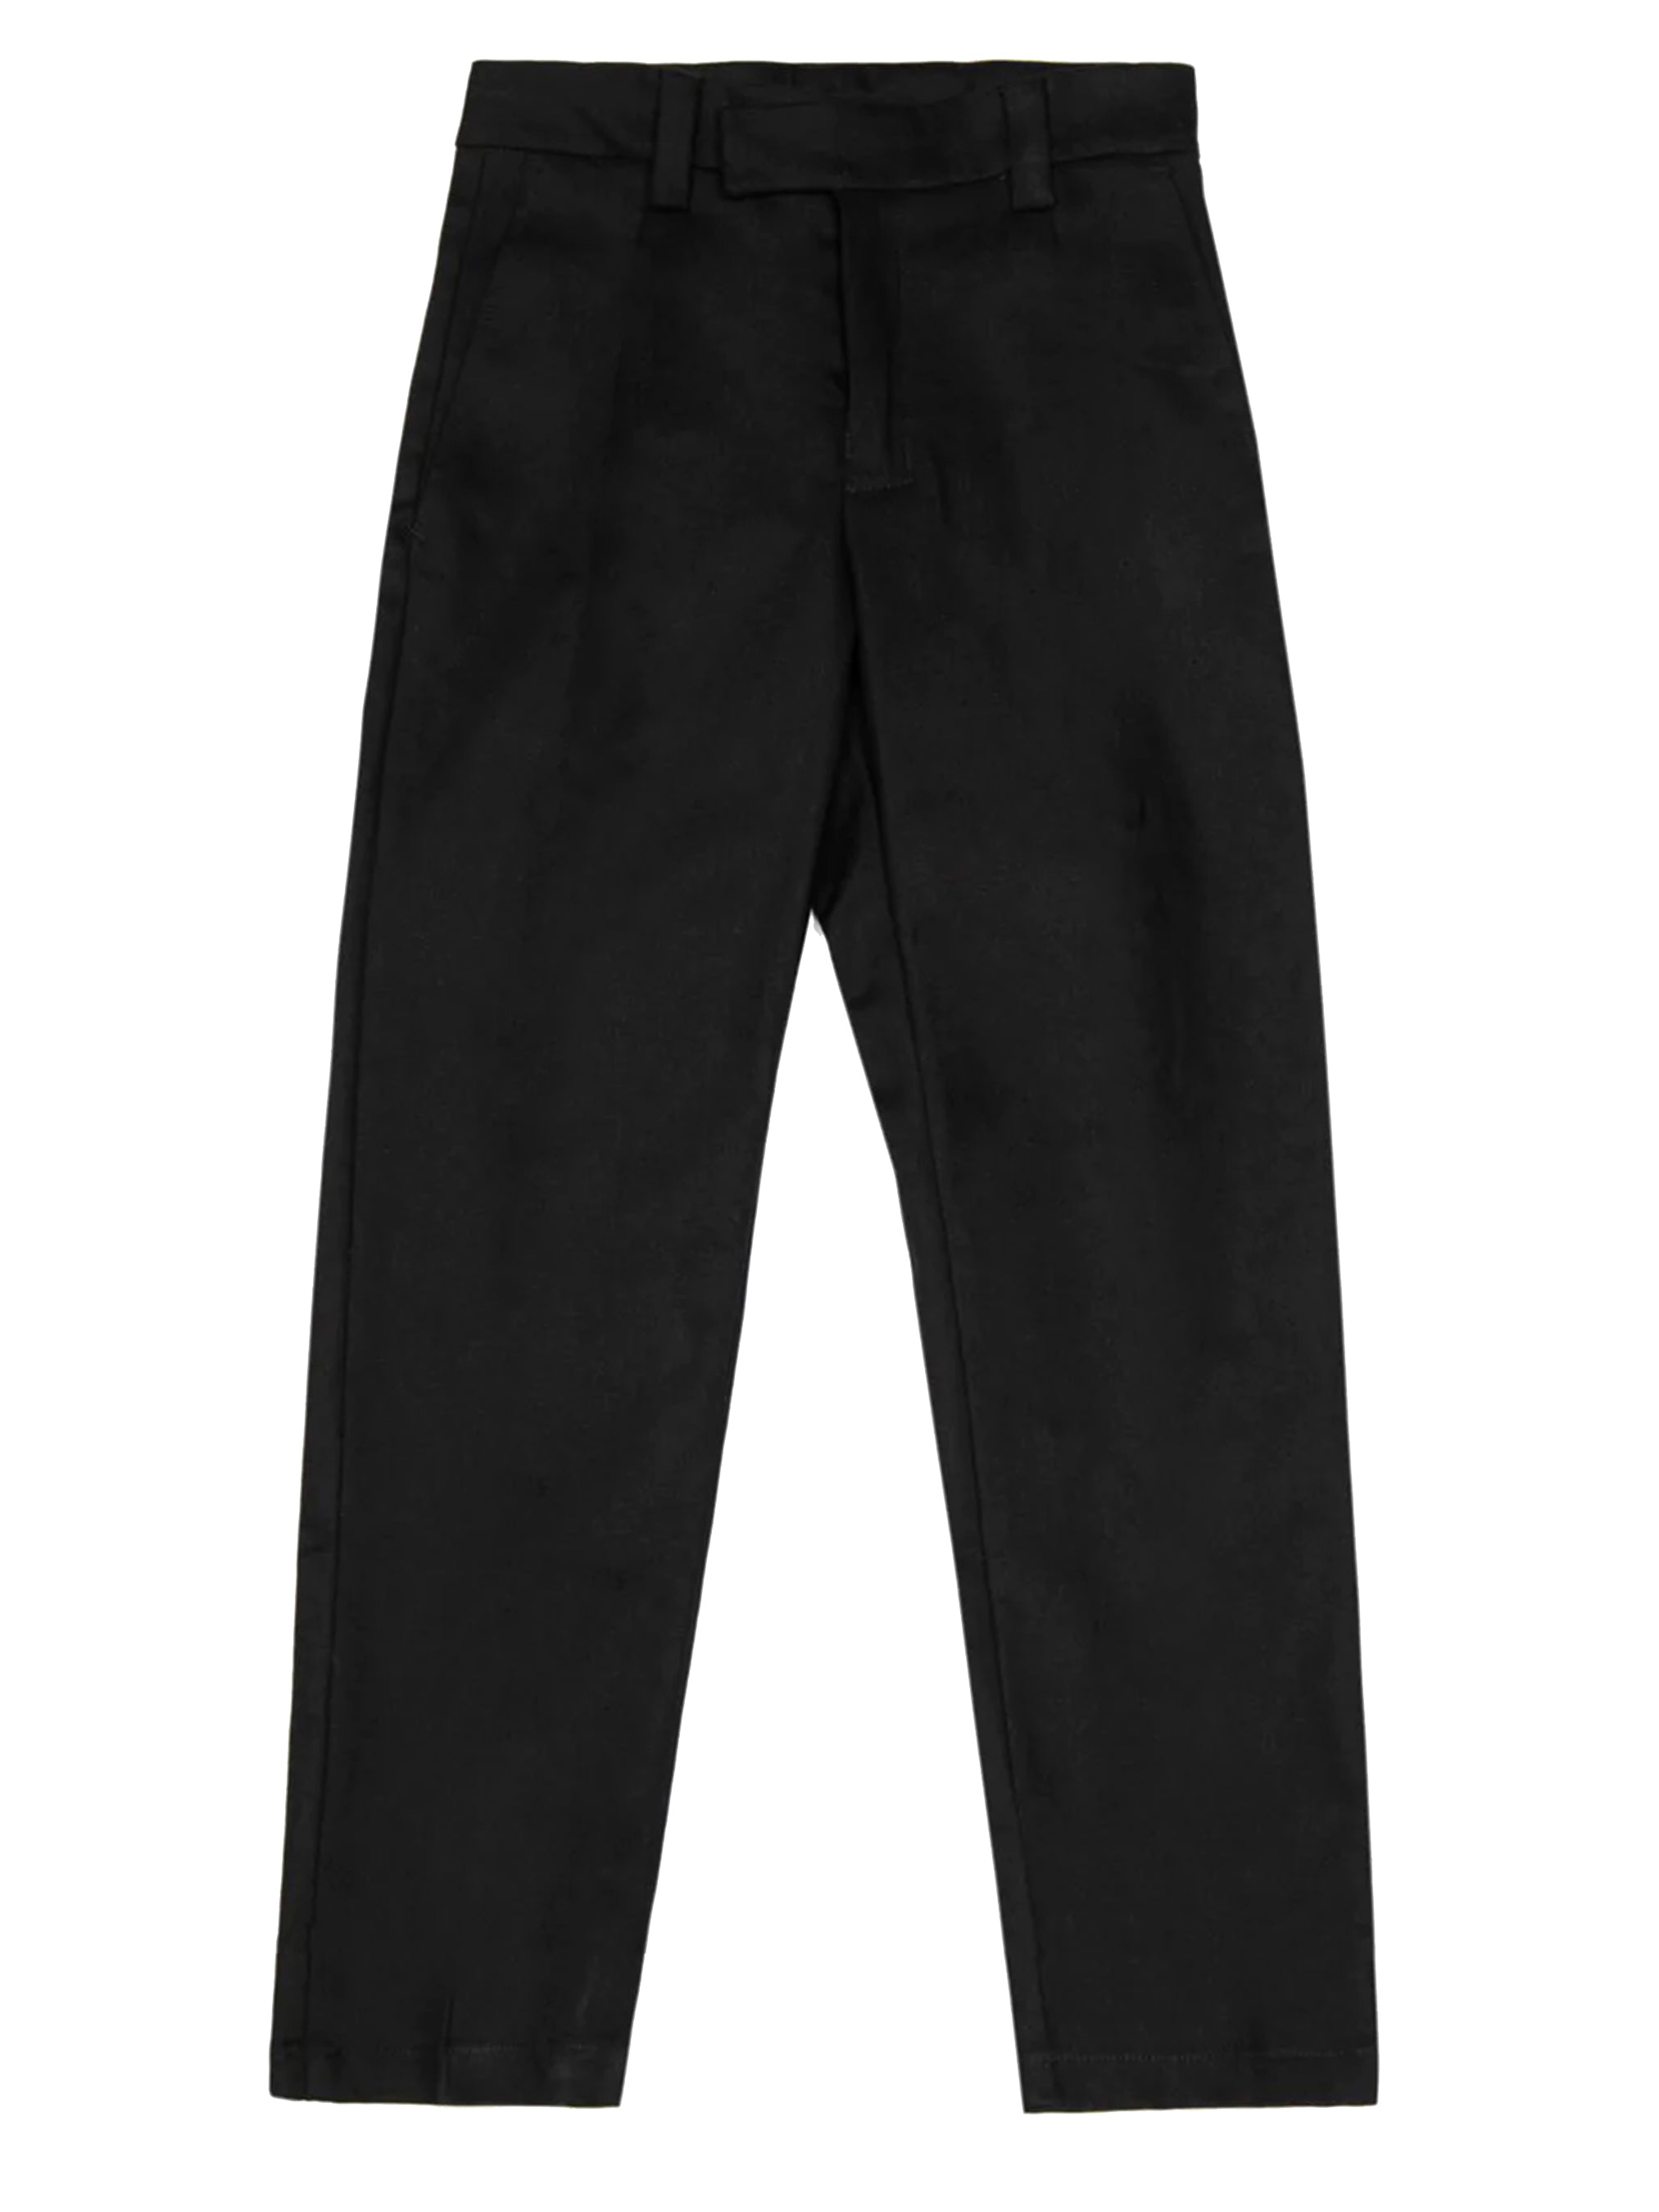 Buy URBAN INDY Genuine Cotton Twill Men's 8 Pocket Cargo Pants - Stylish  and Utilitarian Cargos for Men, Trousers Loose Fit (Small, Black) at  Amazon.in